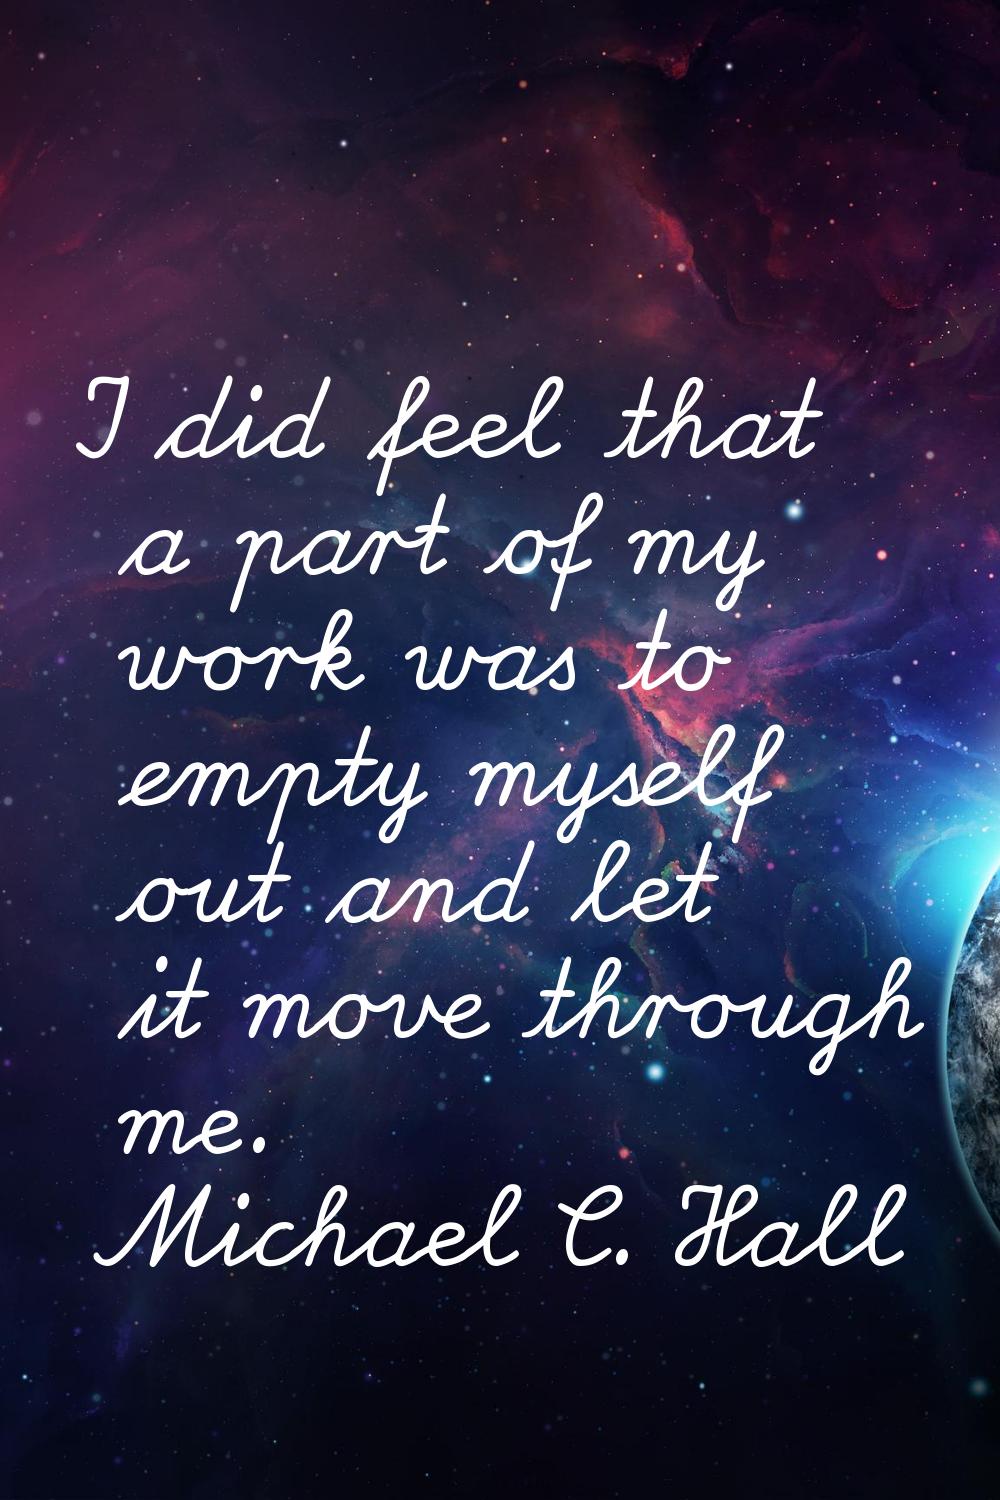 I did feel that a part of my work was to empty myself out and let it move through me.